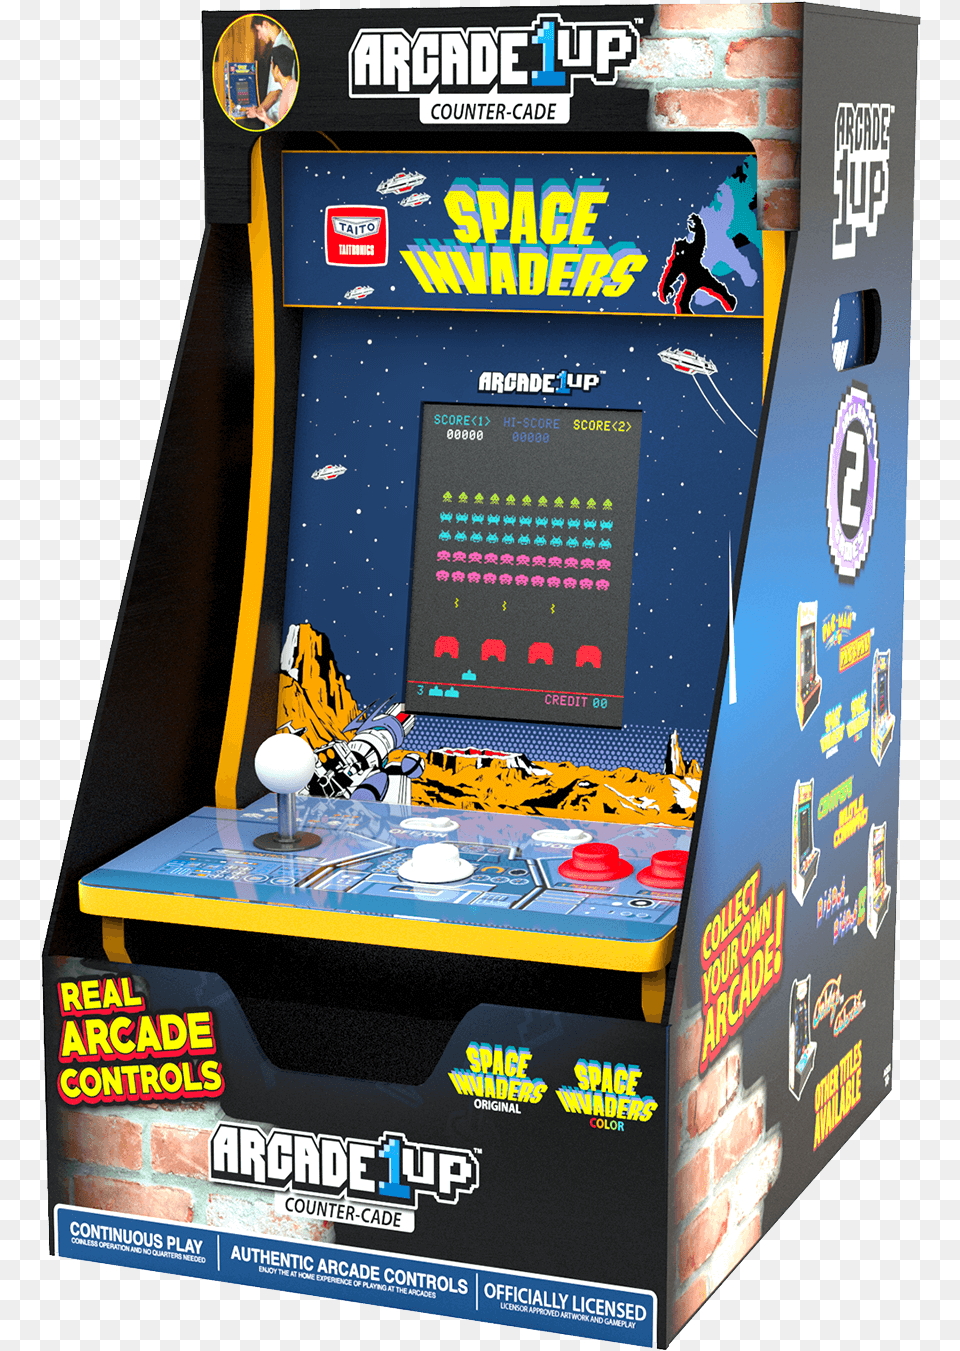 Should I Buy An Arcade 1up Machine Tomu0027s Guide Arcade1up Countercade Space Invaders, Arcade Game Machine, Game, Person Free Png